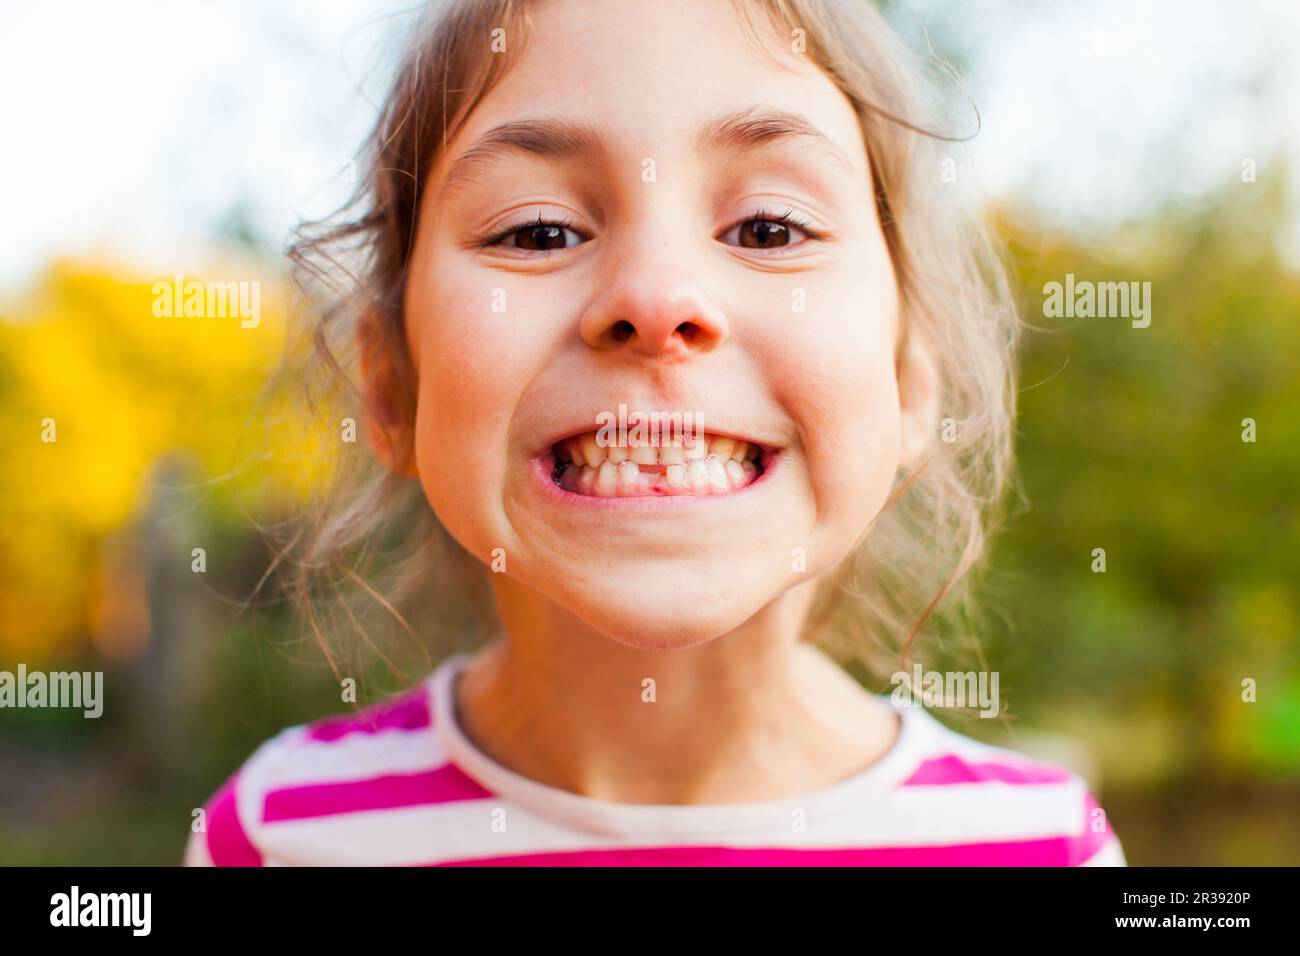 Smiling girl showing first permanent tooth coming up Stock Photo